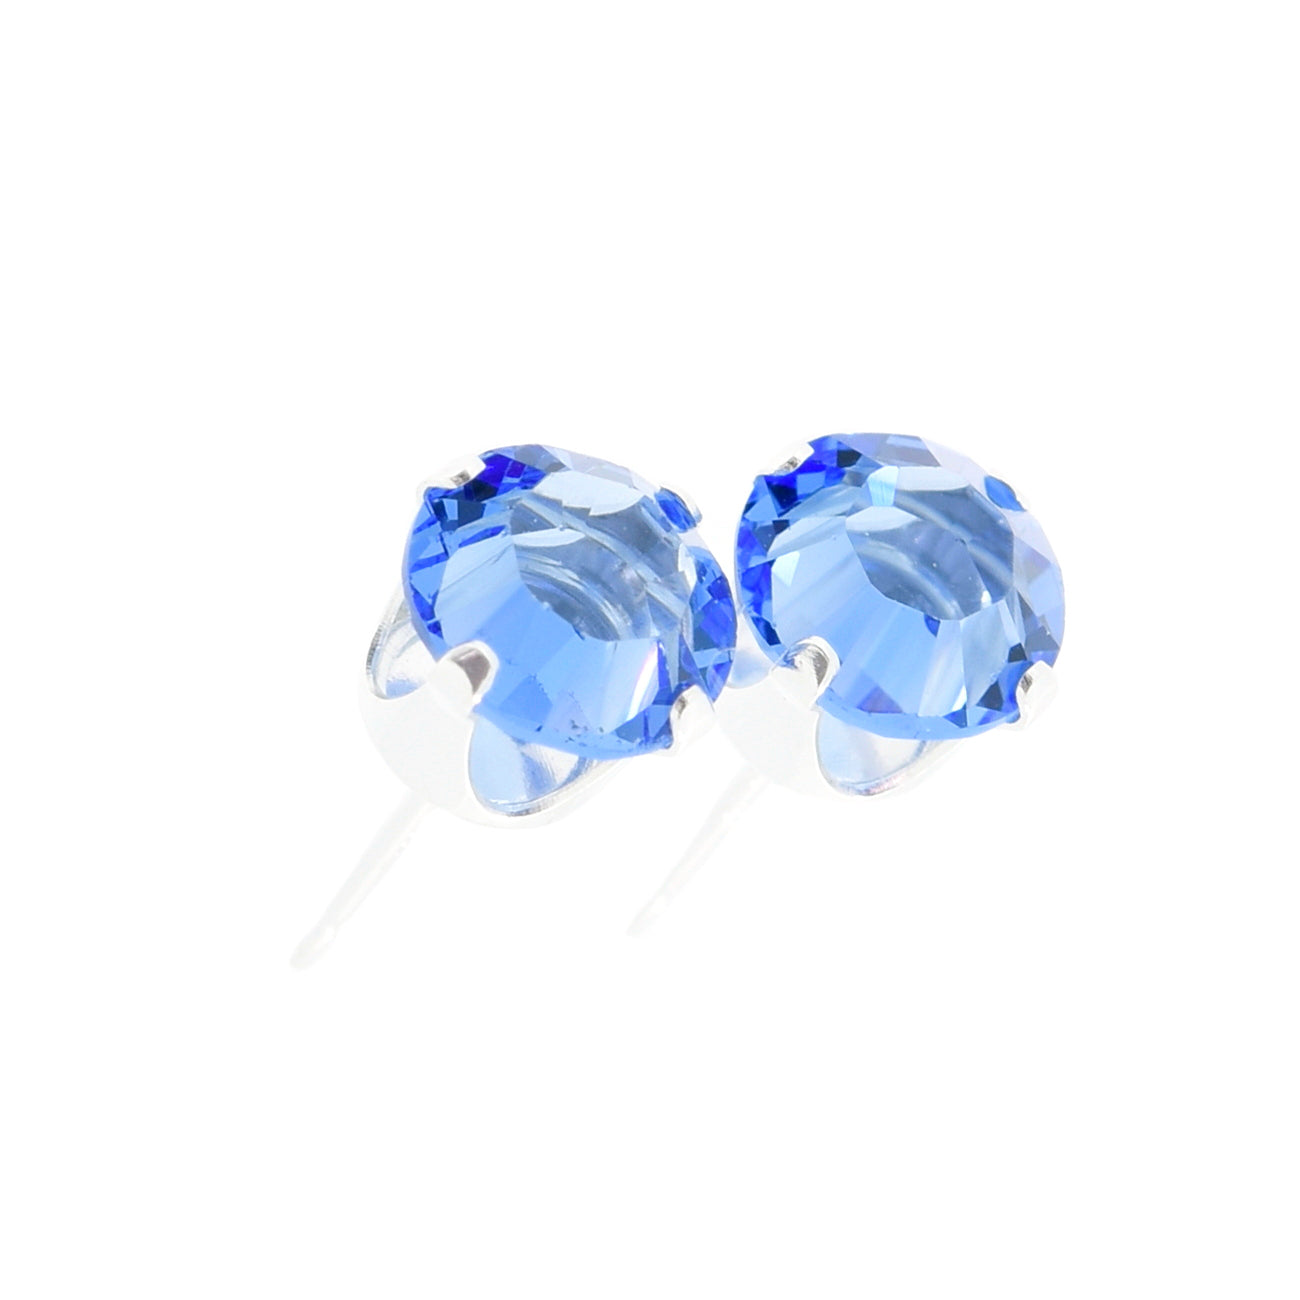 pewterhooter® Women's Classic Collection 925 Sterling silver earrings with sparkling Sapphire Blue channel crystals, packaged in a gift box for any occasion.